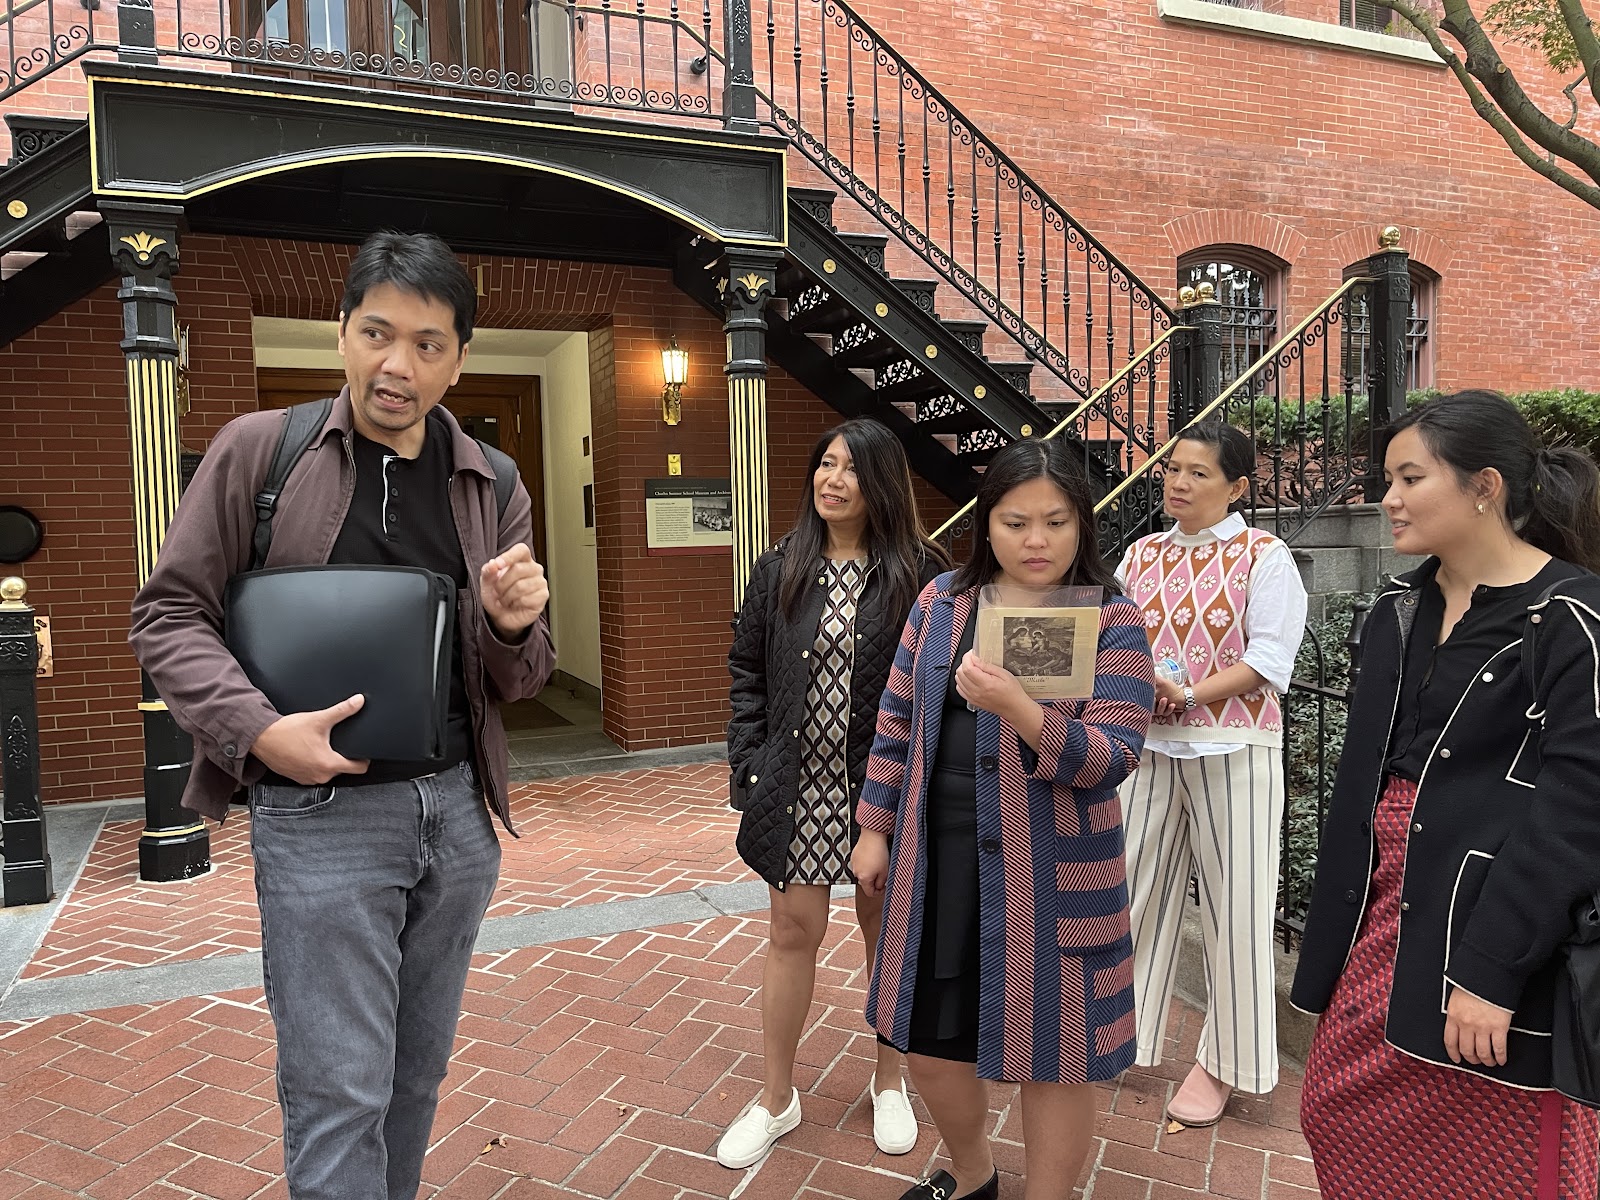 Mr. Tiongson discussing the life and works of Mr. Galo Ocampo in front of the Charles Sumner School.